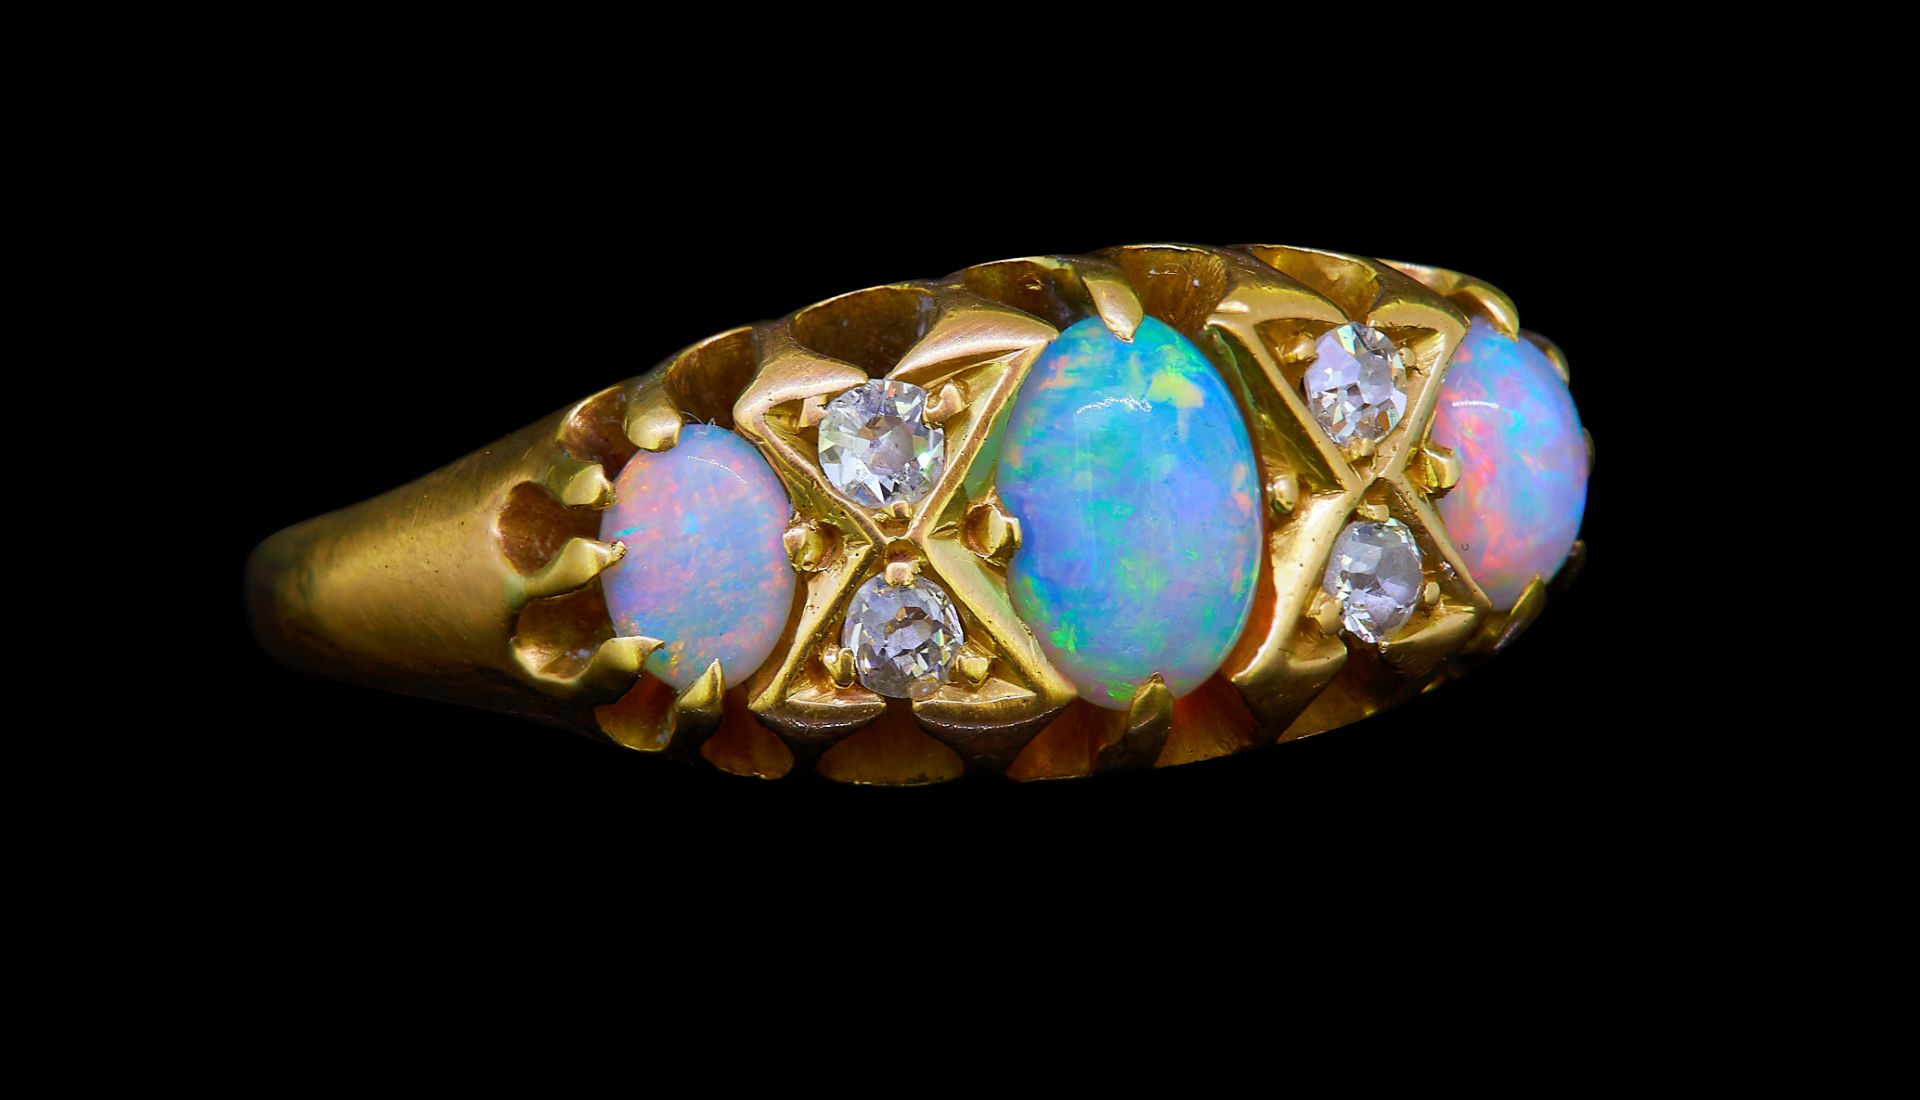 ANTIQUE OPAL AND DIAMOND DRESS RING